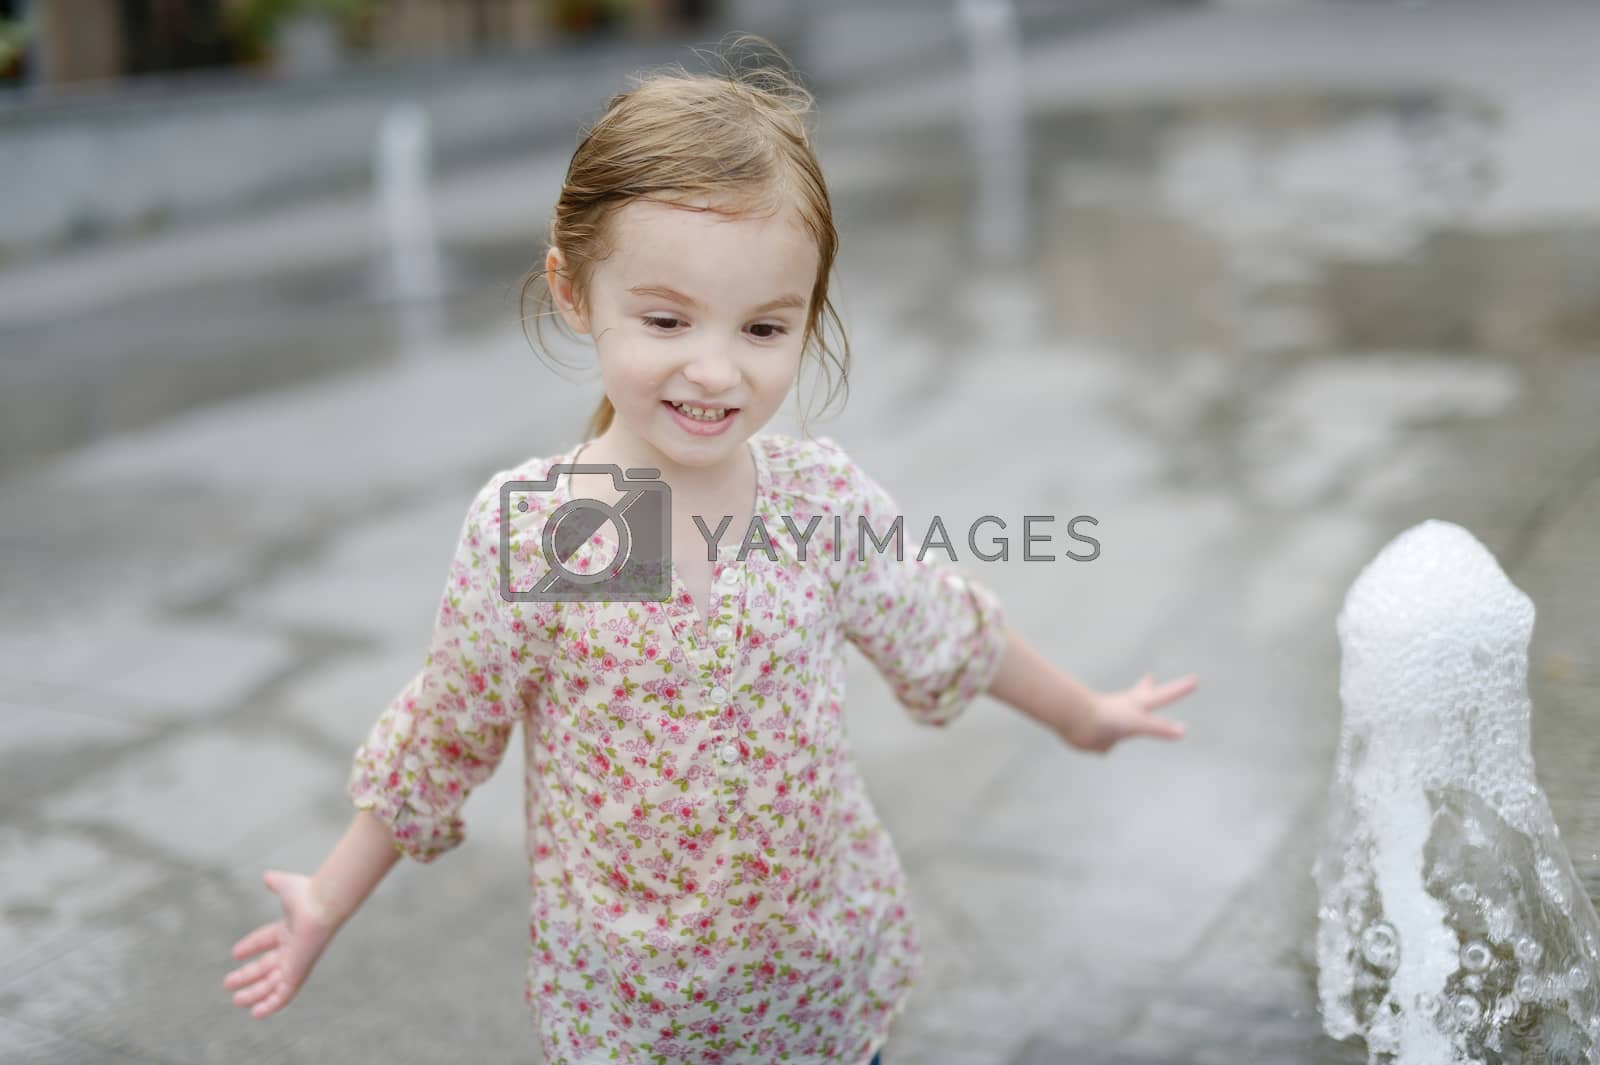 Royalty free image of Adorable little girl having fun by a fountain by maximkabb